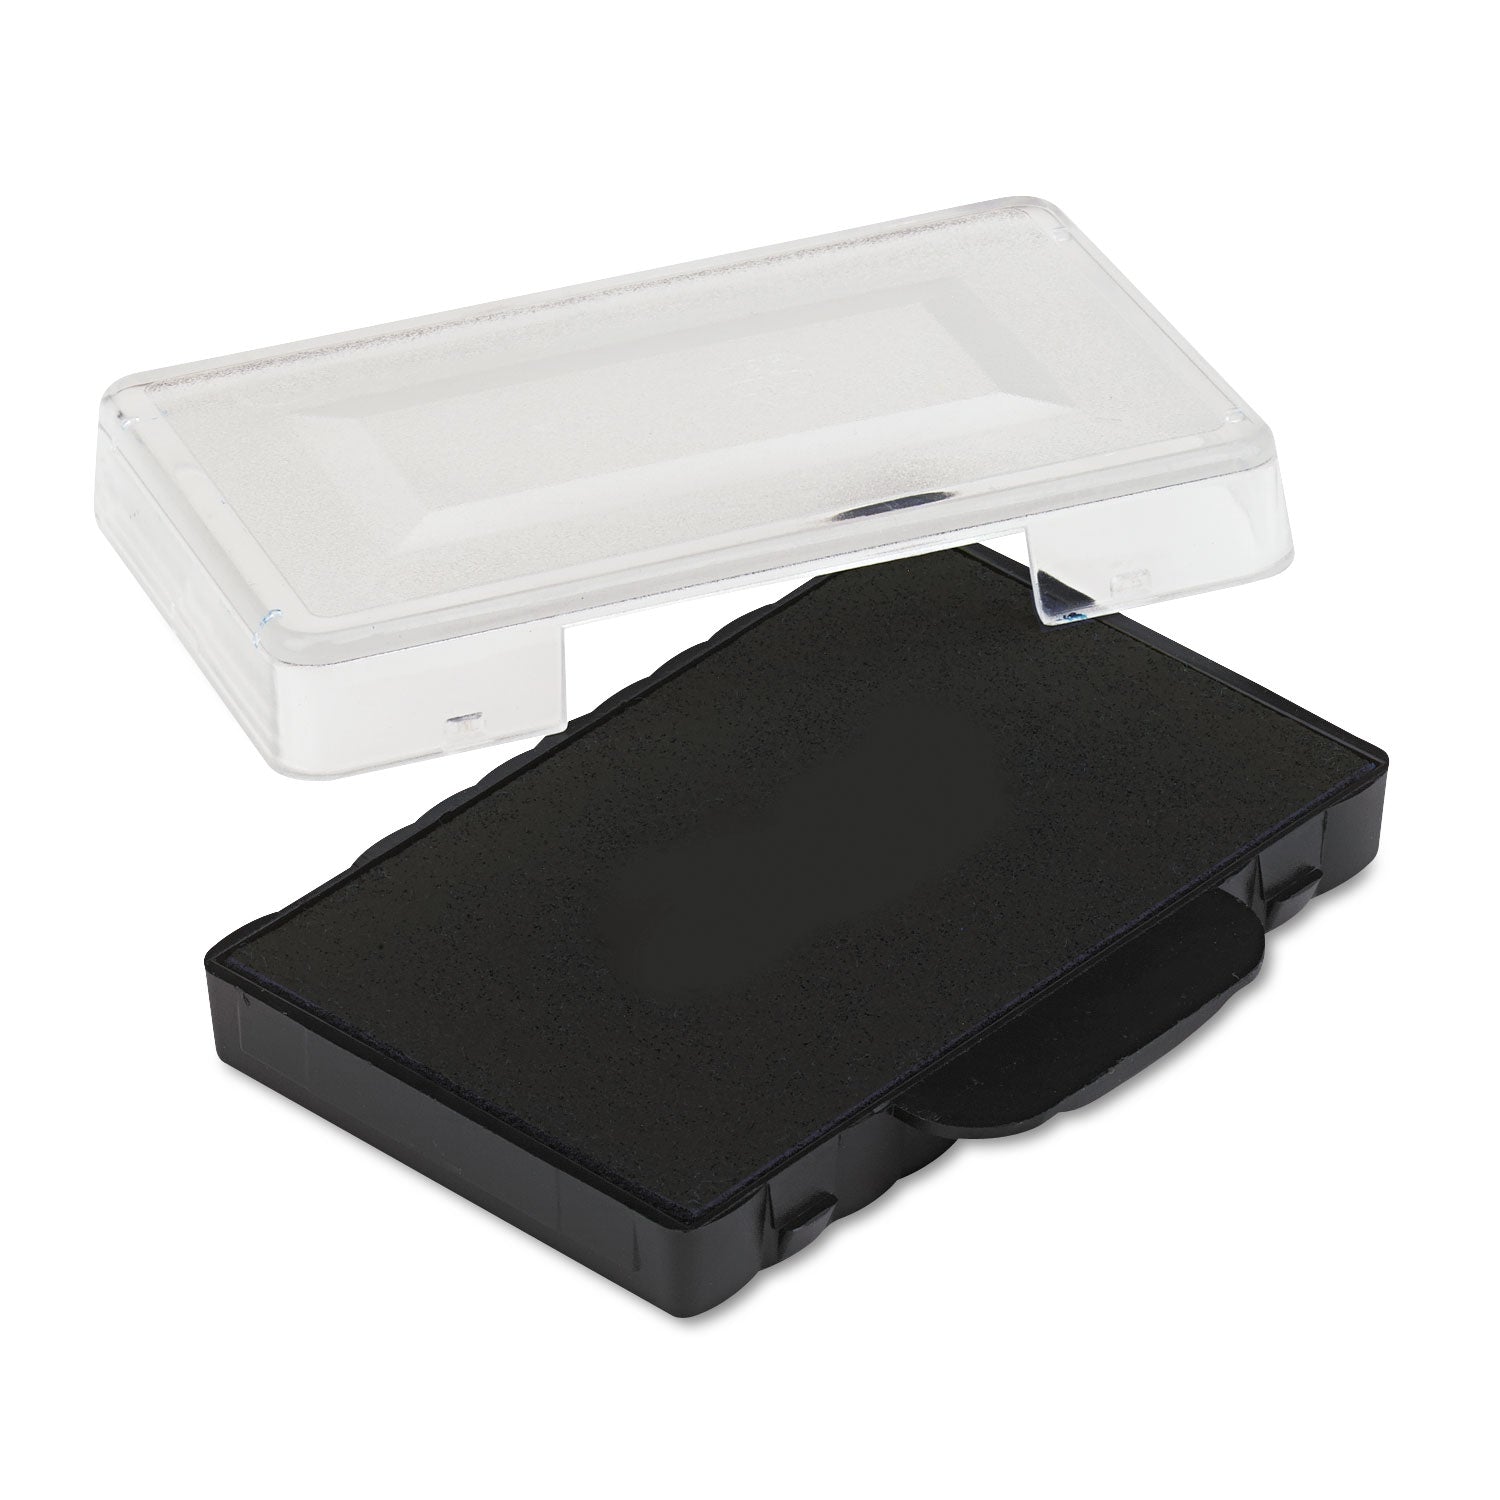 T5430 Professional Replacement Ink Pad for Trodat Custom Self-Inking Stamps, 1" x 1.63", Black - 